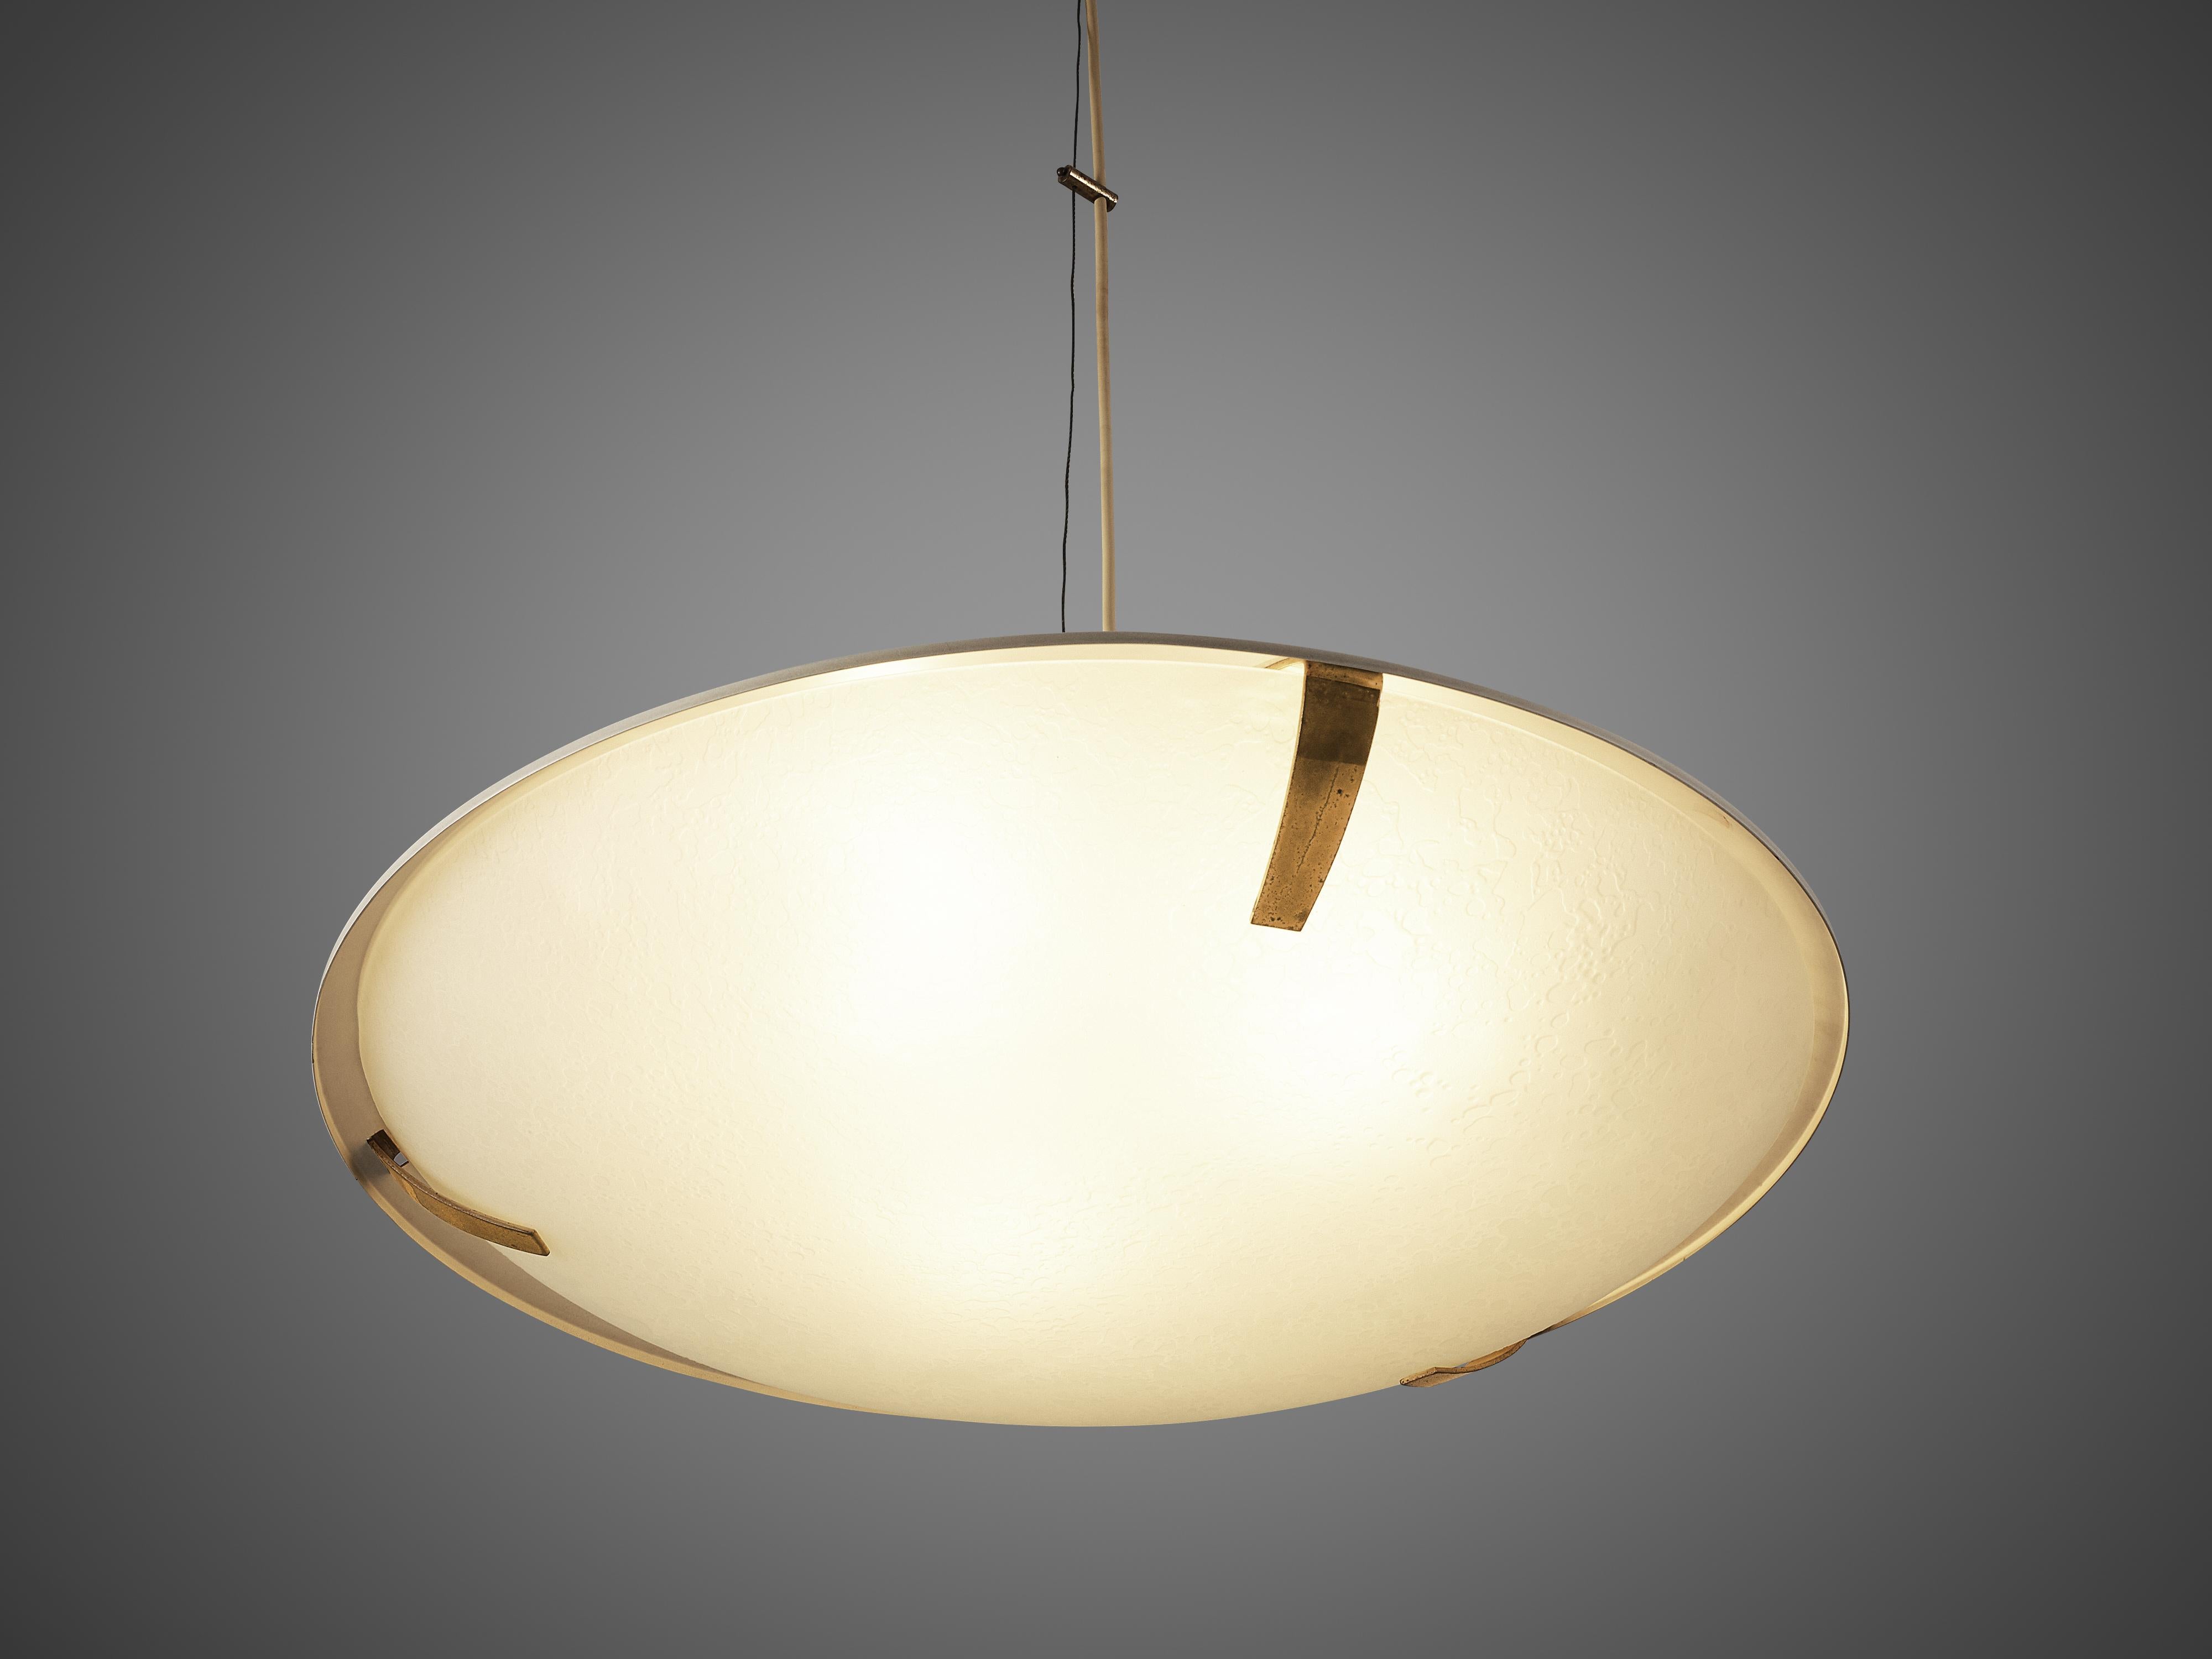 Stilnovo, pendant '1140', aluminium, glass, brass, Italy, circa 1960

The '1140' pendant by Stilnovo consists out of a flat, oval lamp. On a thin cable and wire hangs the oval form made out of two pieces which are hold together by brass